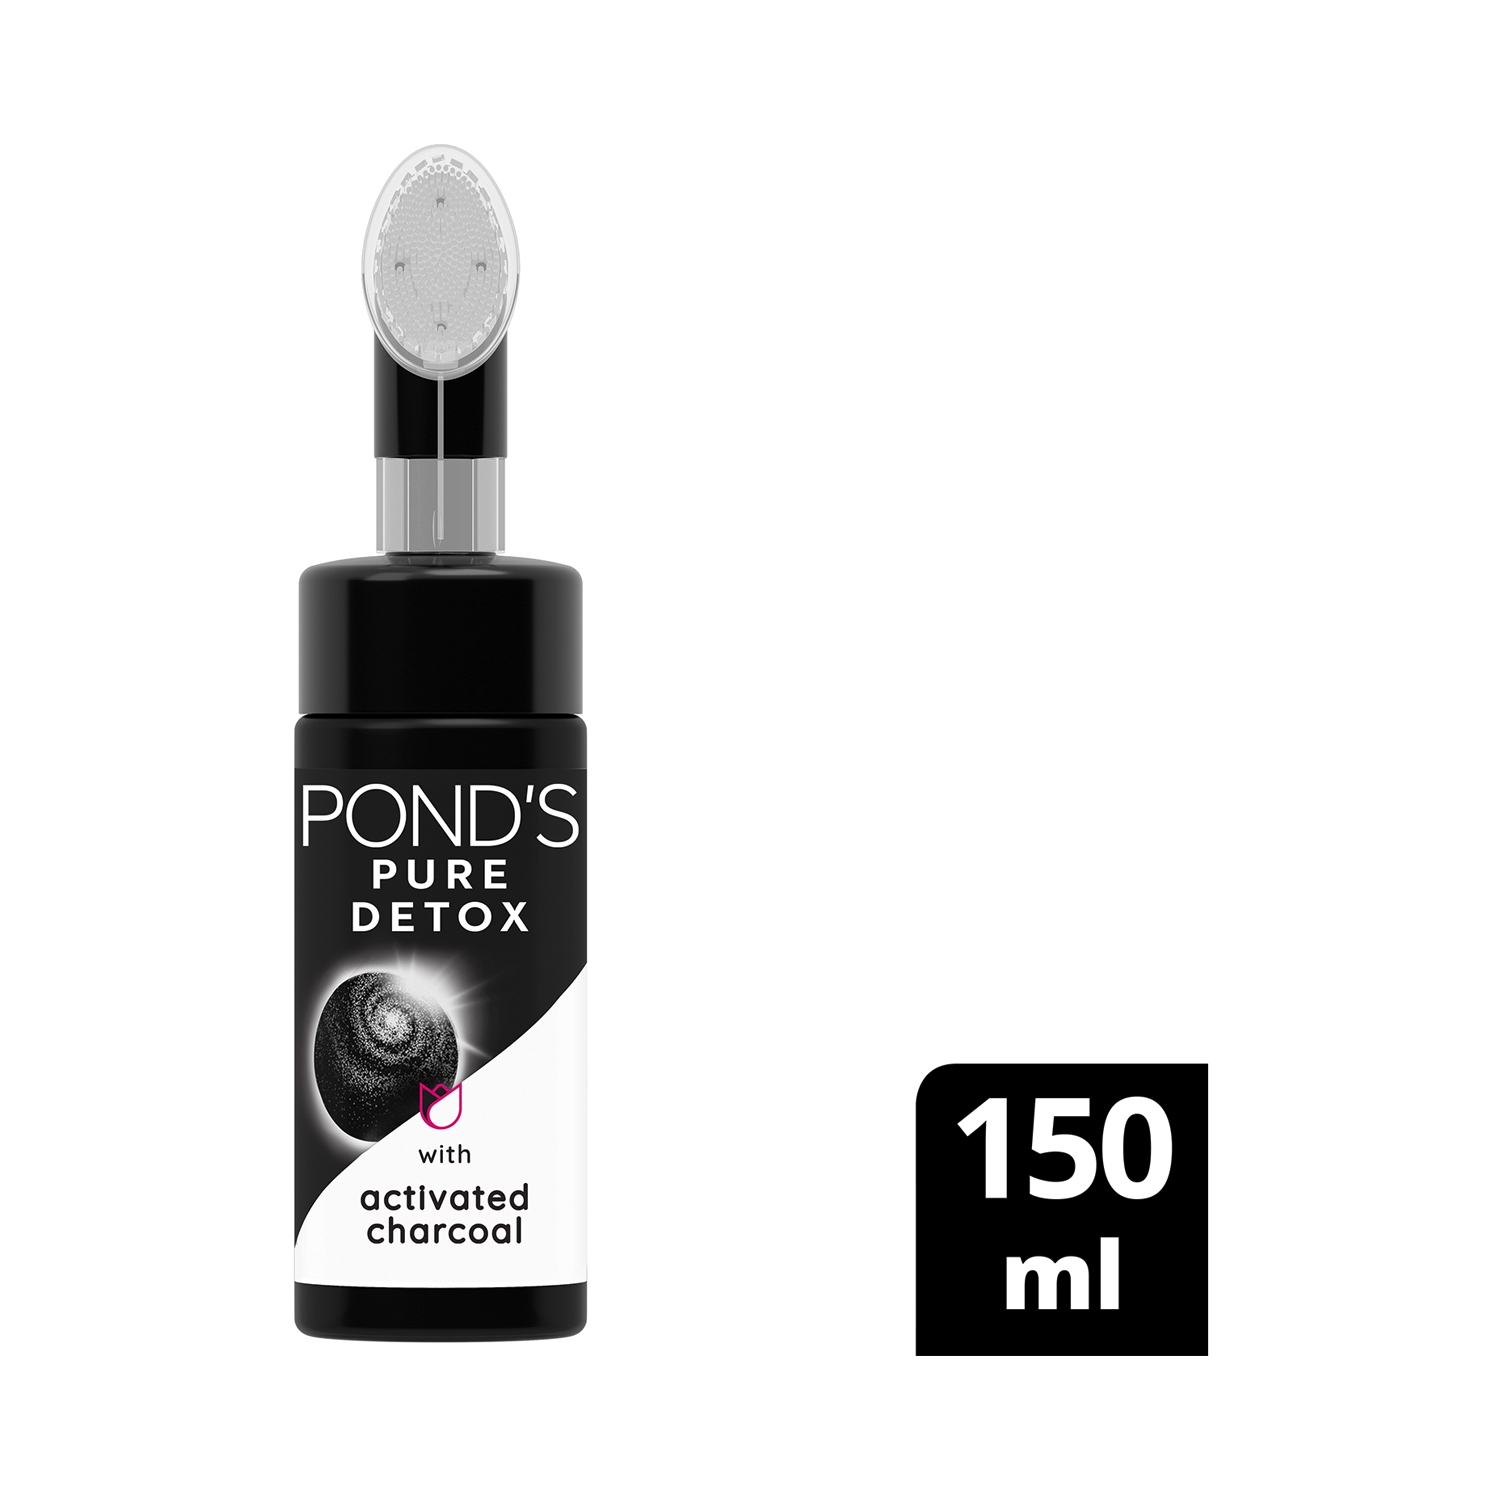 Pond's | Pond's Pure Detox Foaming Brush Facewash With Activated Charcoal (150ml)